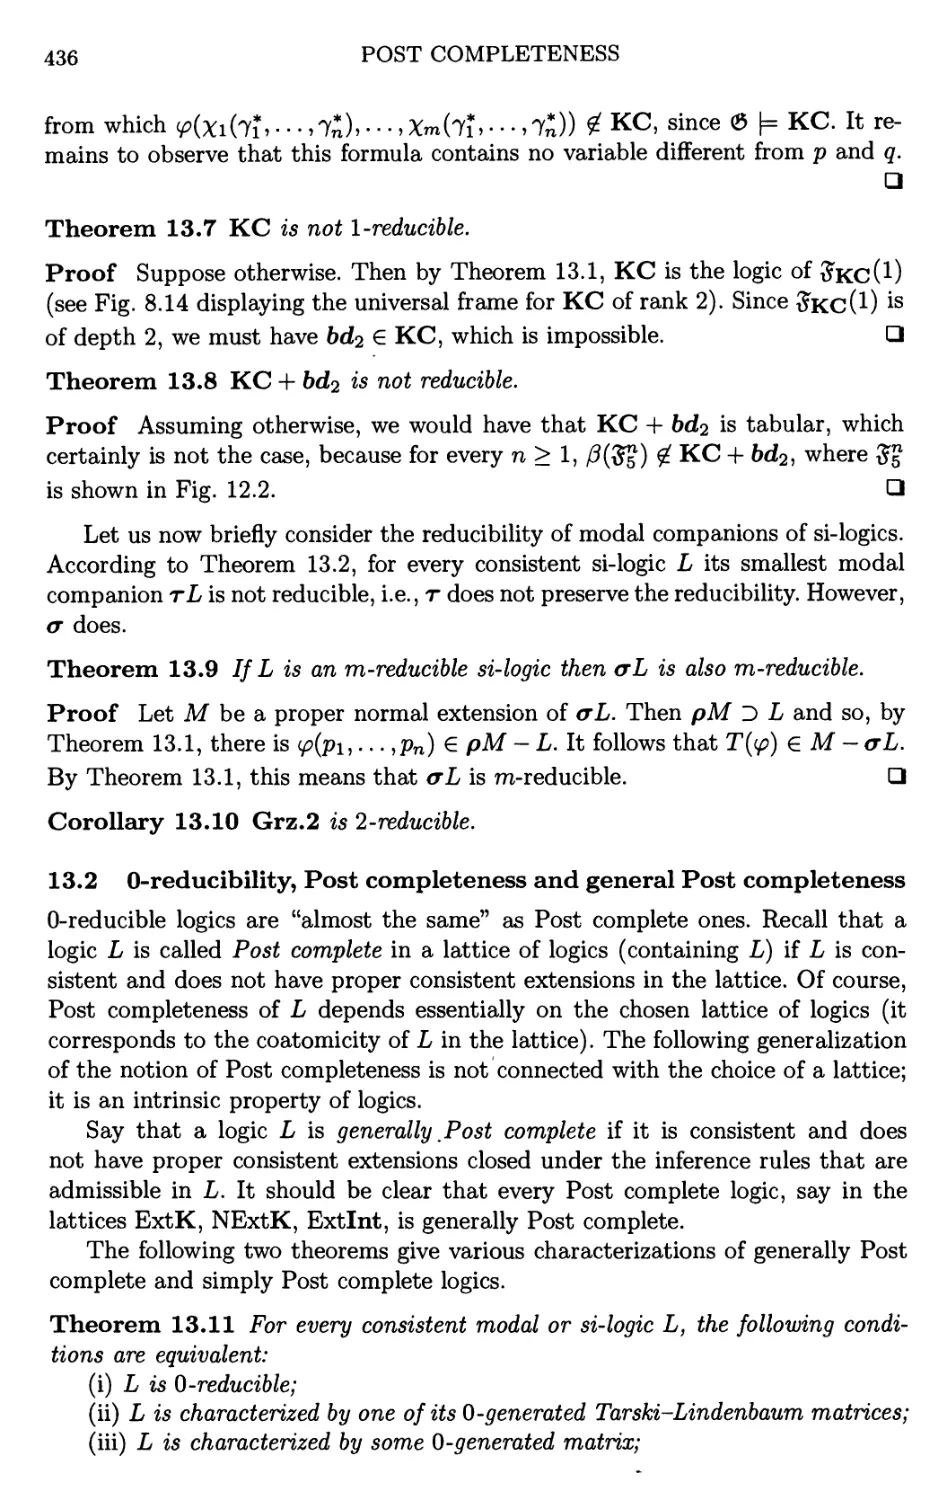 13.2 0-reducibility, Post completeness and general Post completeness